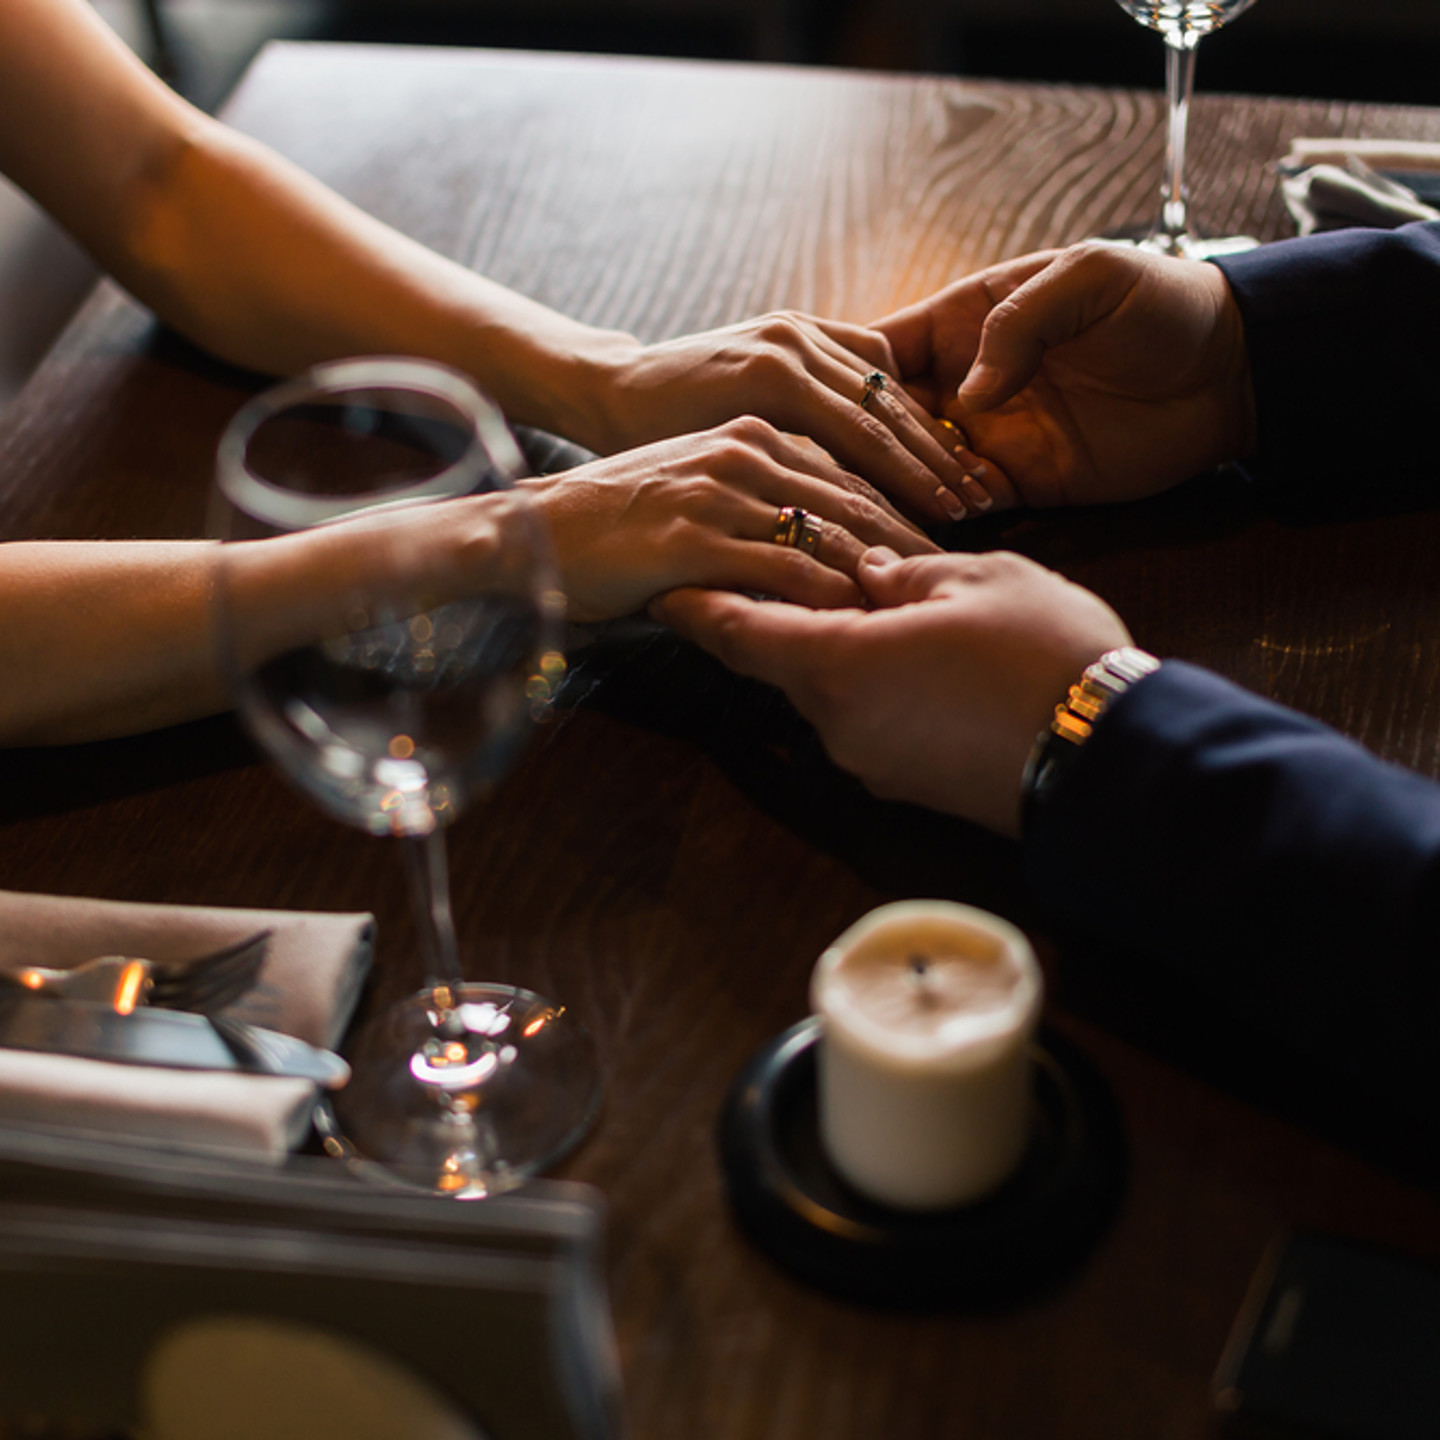 Couple holding hands at table